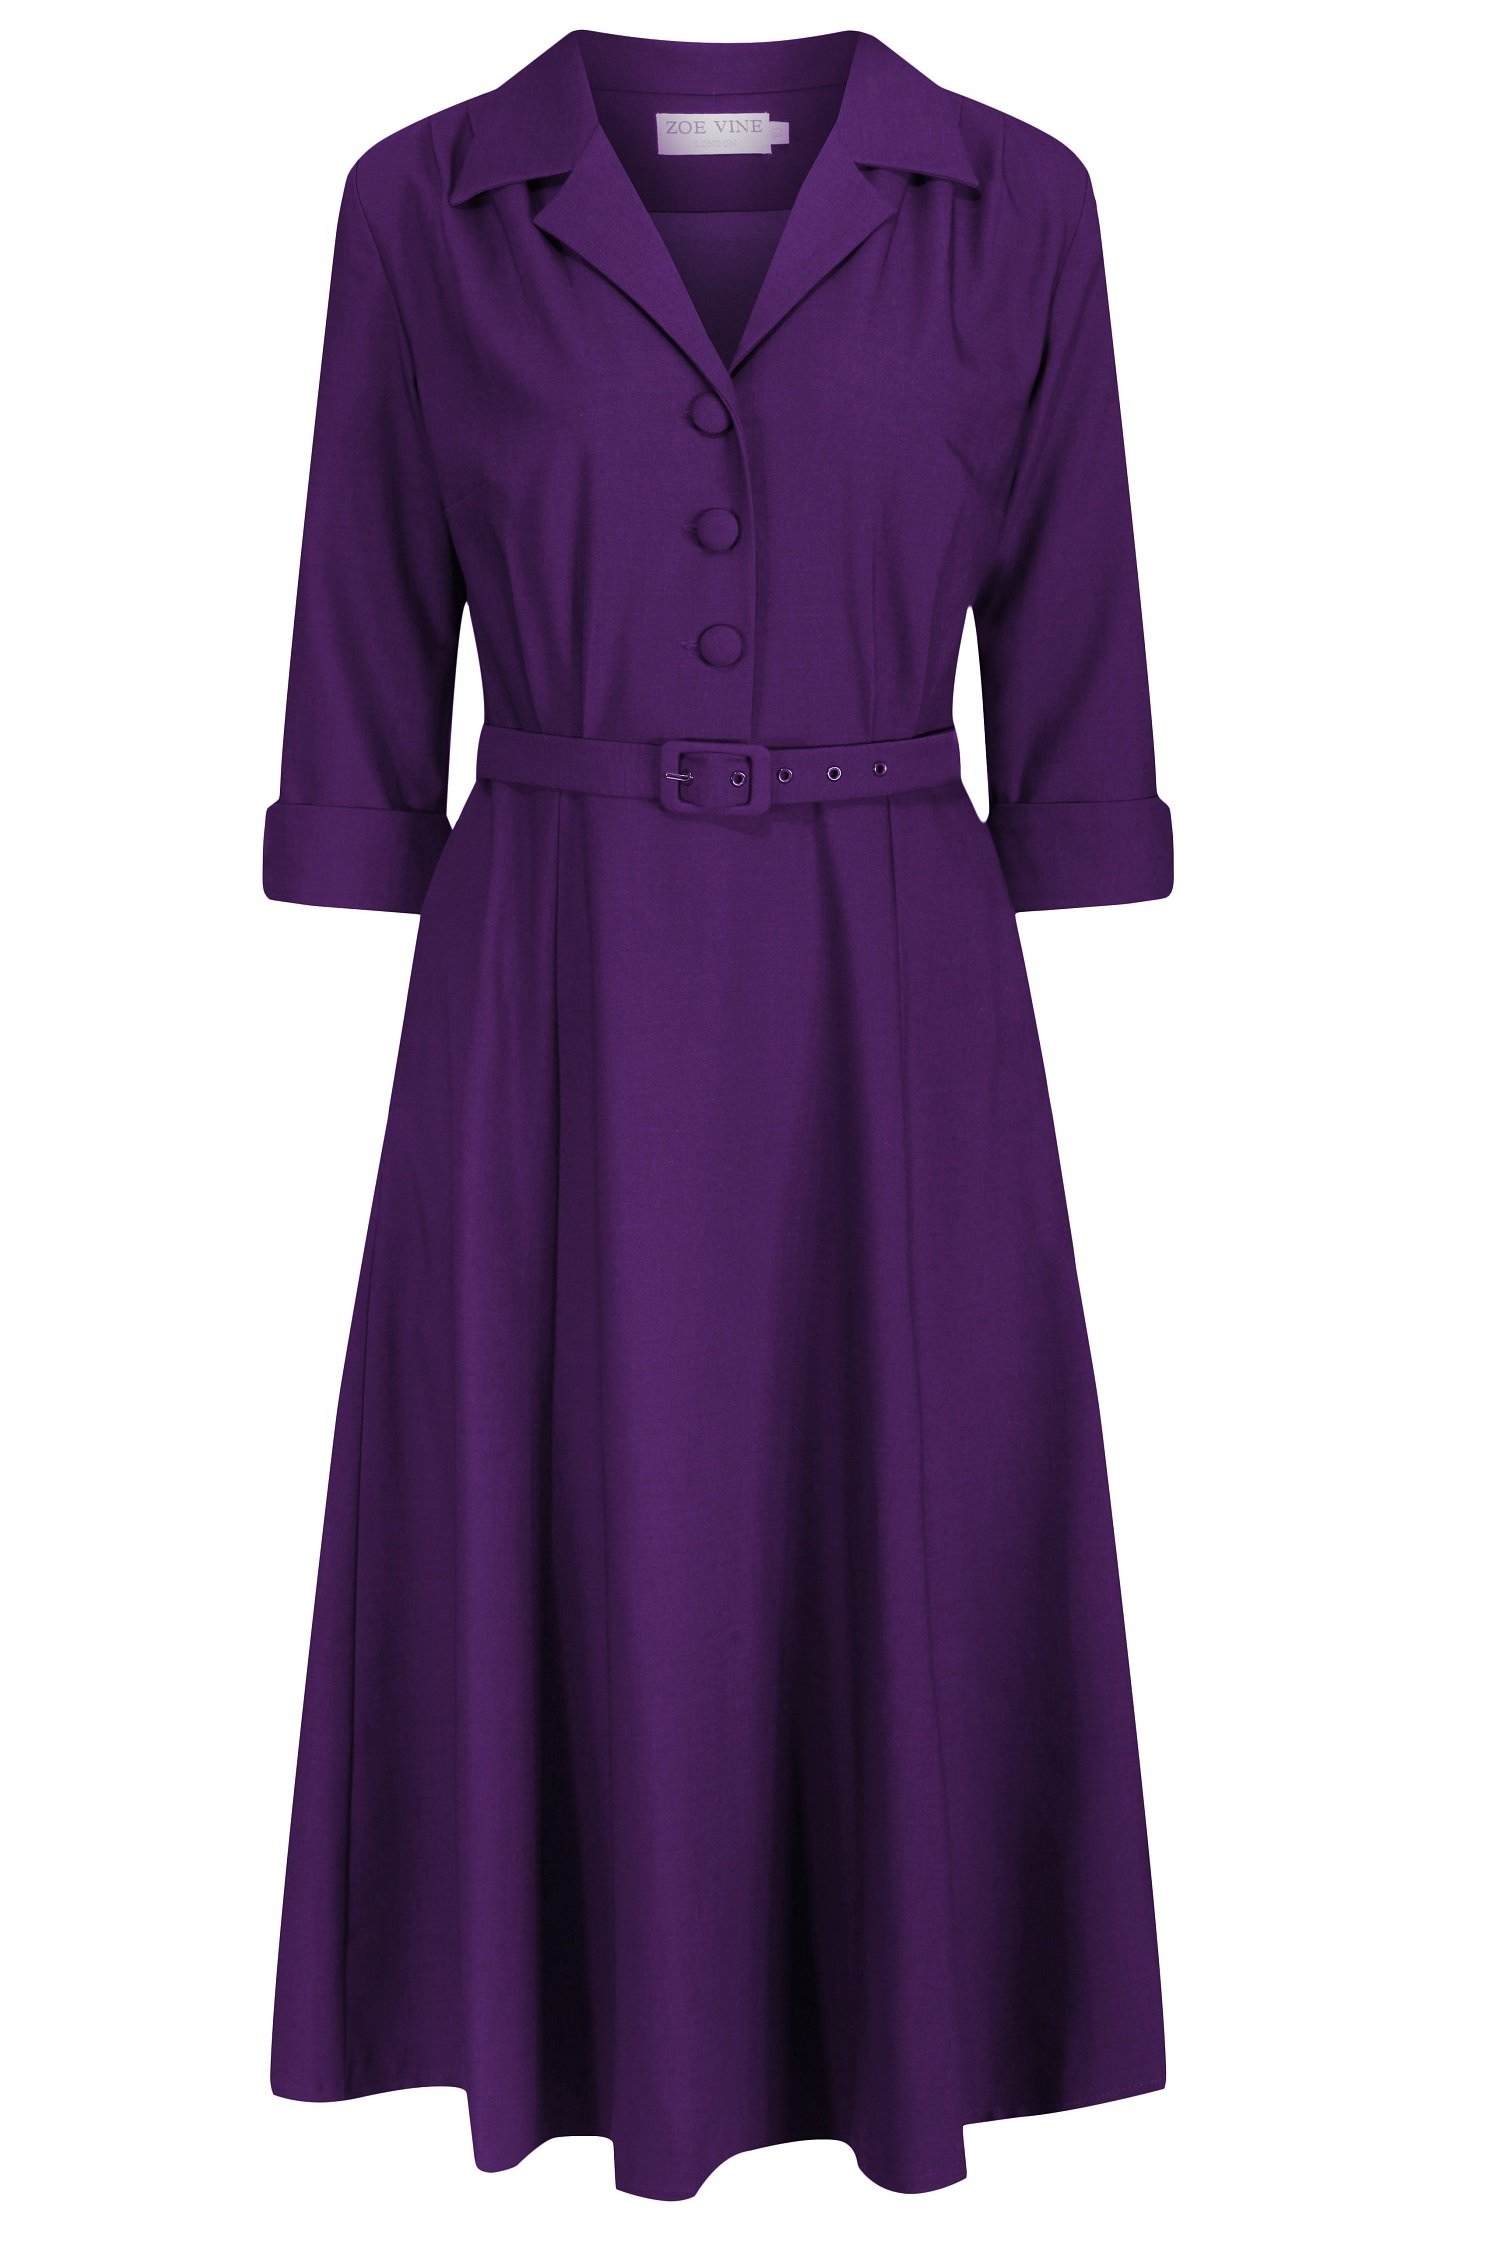 The Purple Mabel Shirt Dress - Zoe Vine - At The Boutique Cirencester